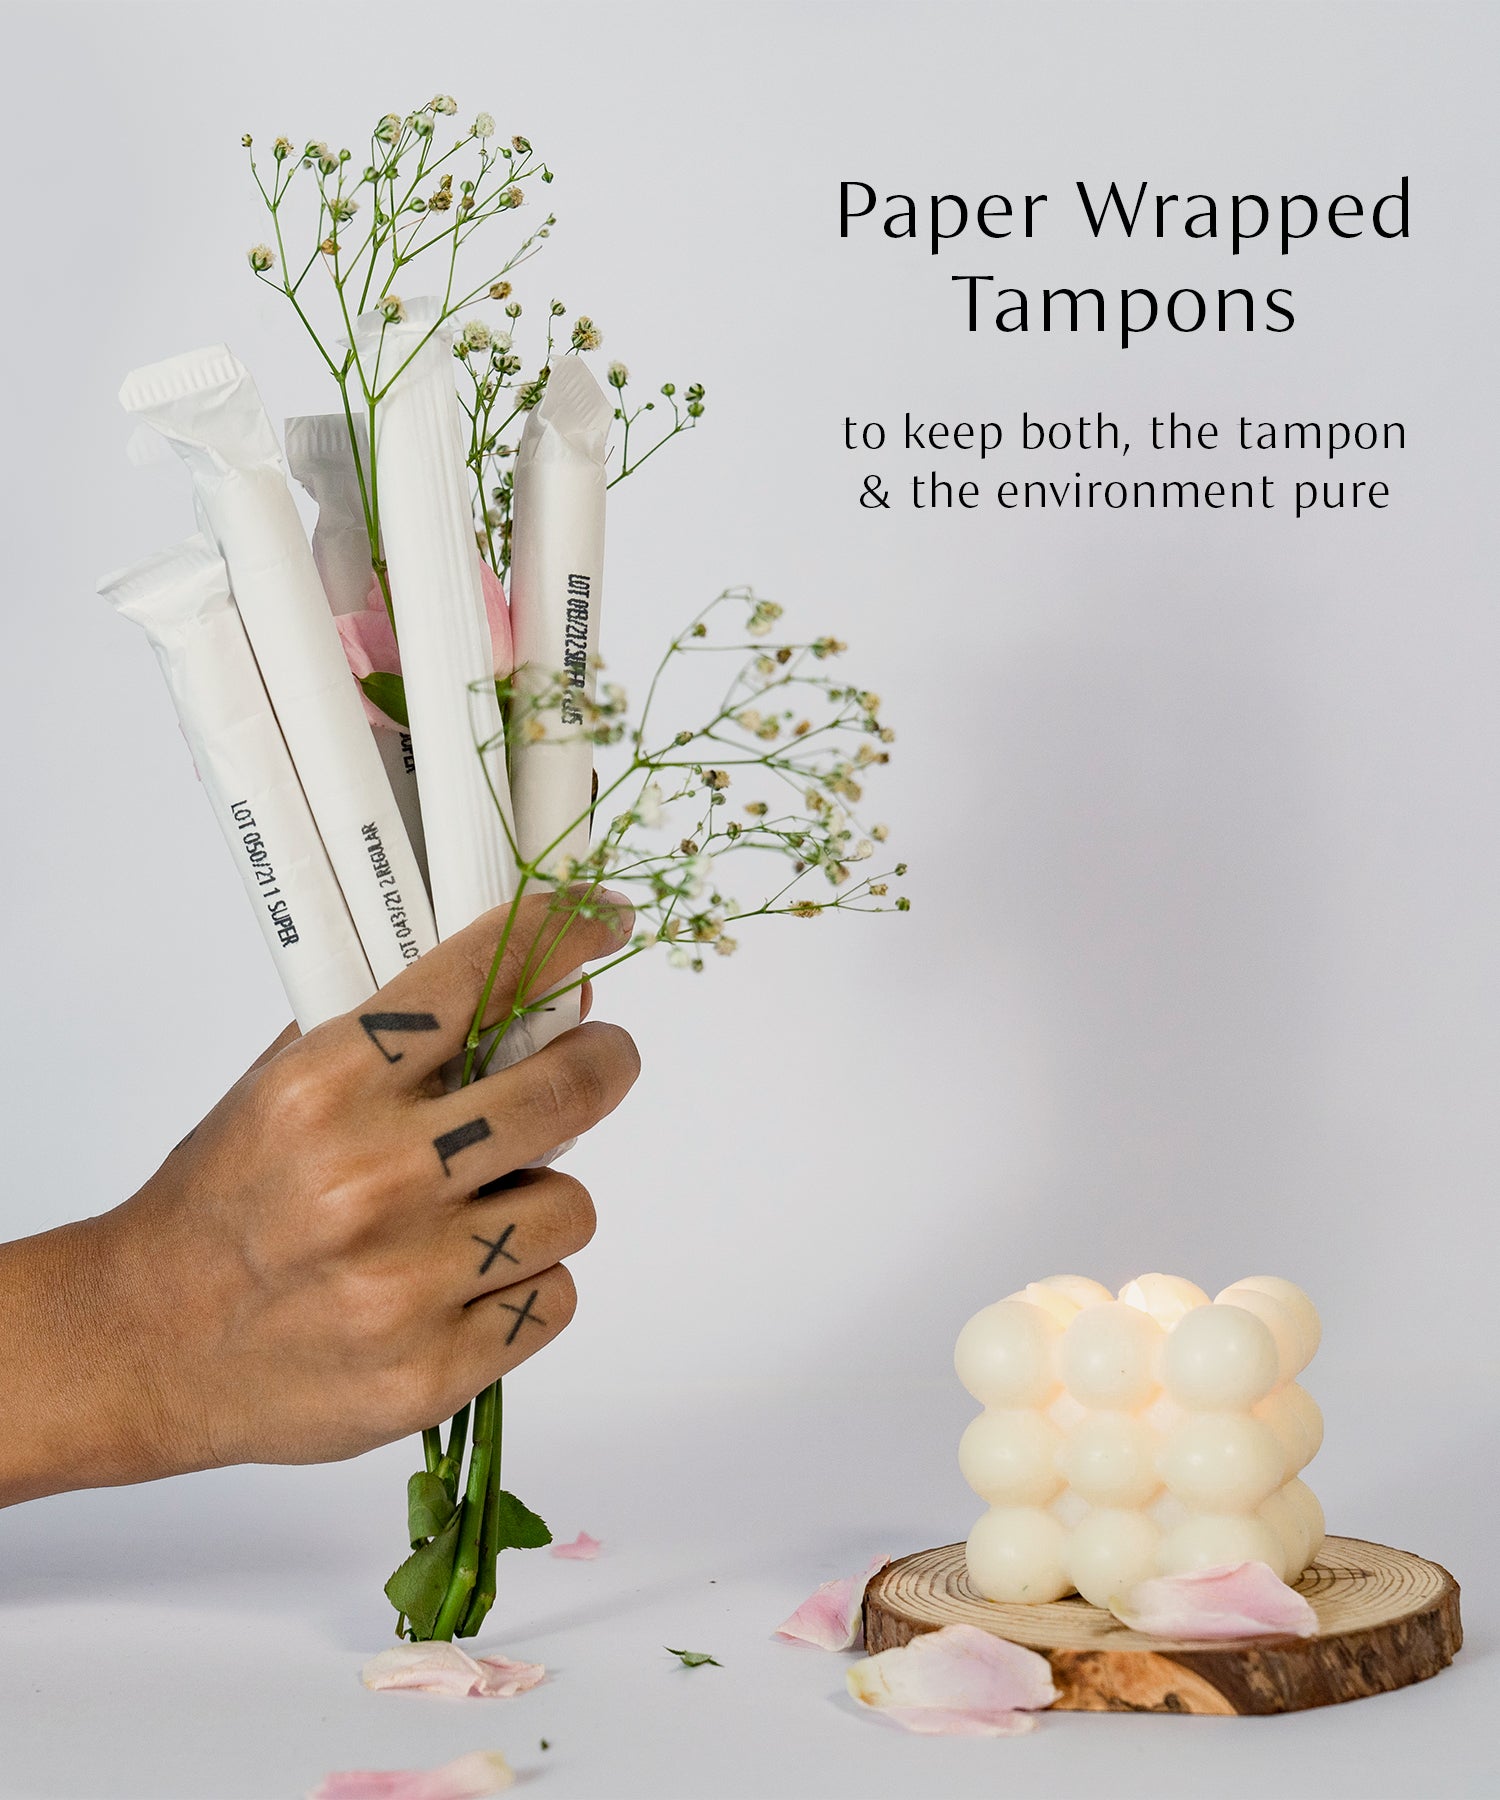 Organic Cotton Tampons with Applicators